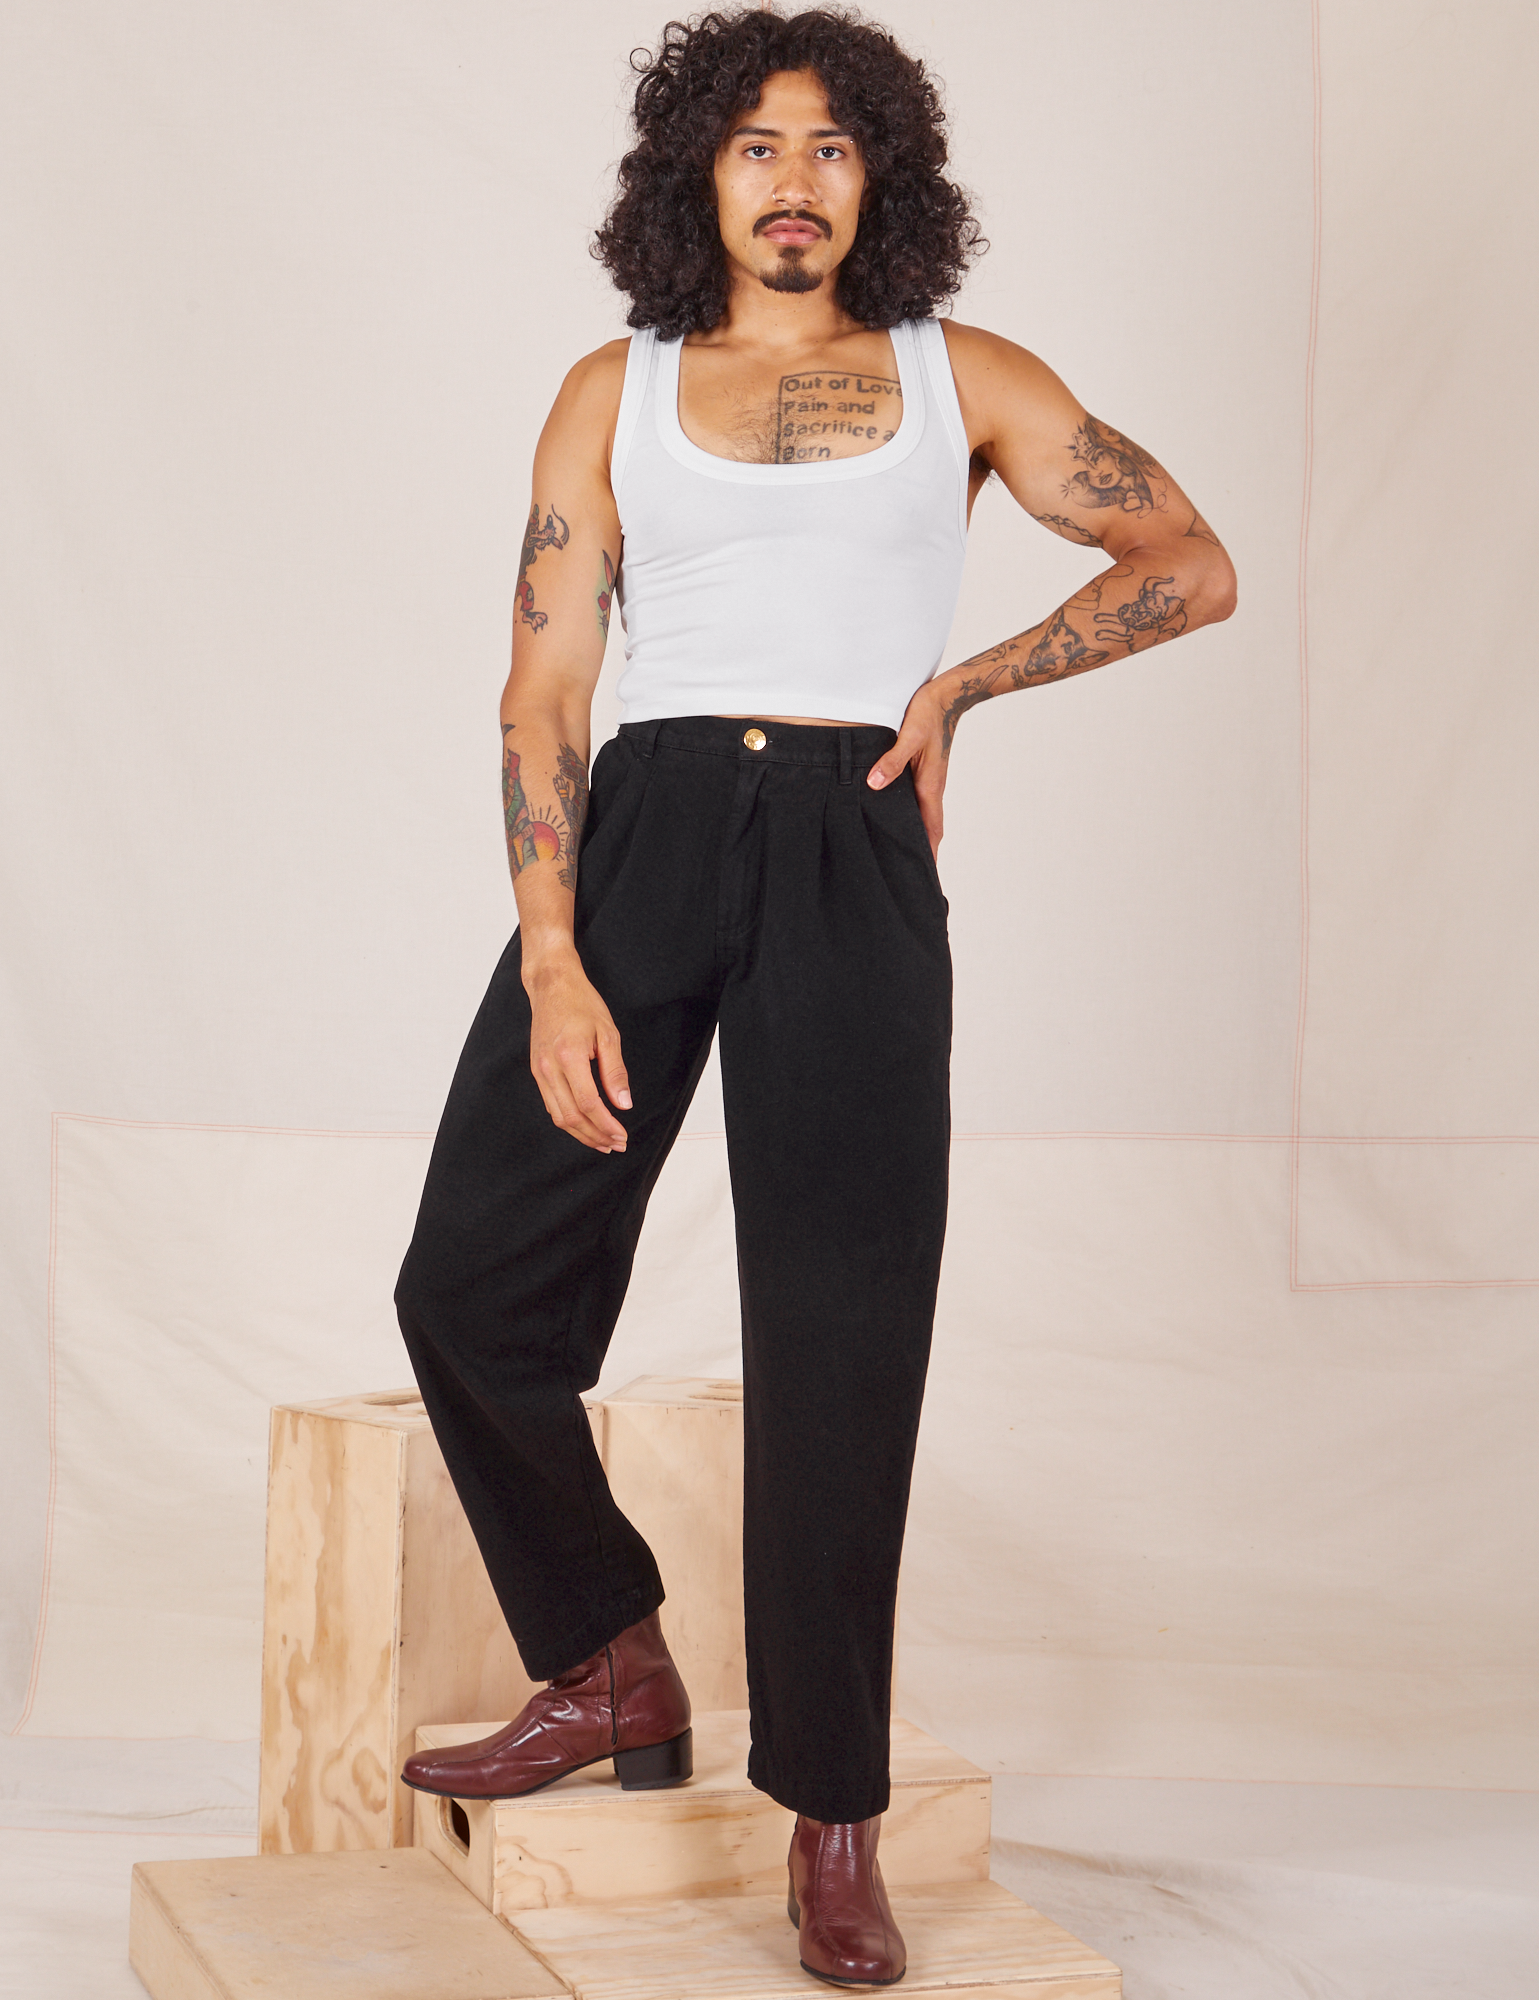 Jesse is 5&#39;8&quot; and wearing XXS Heavyweight Trousers in Basic Black paired with Cropped Tank Top in vintage tee off-white